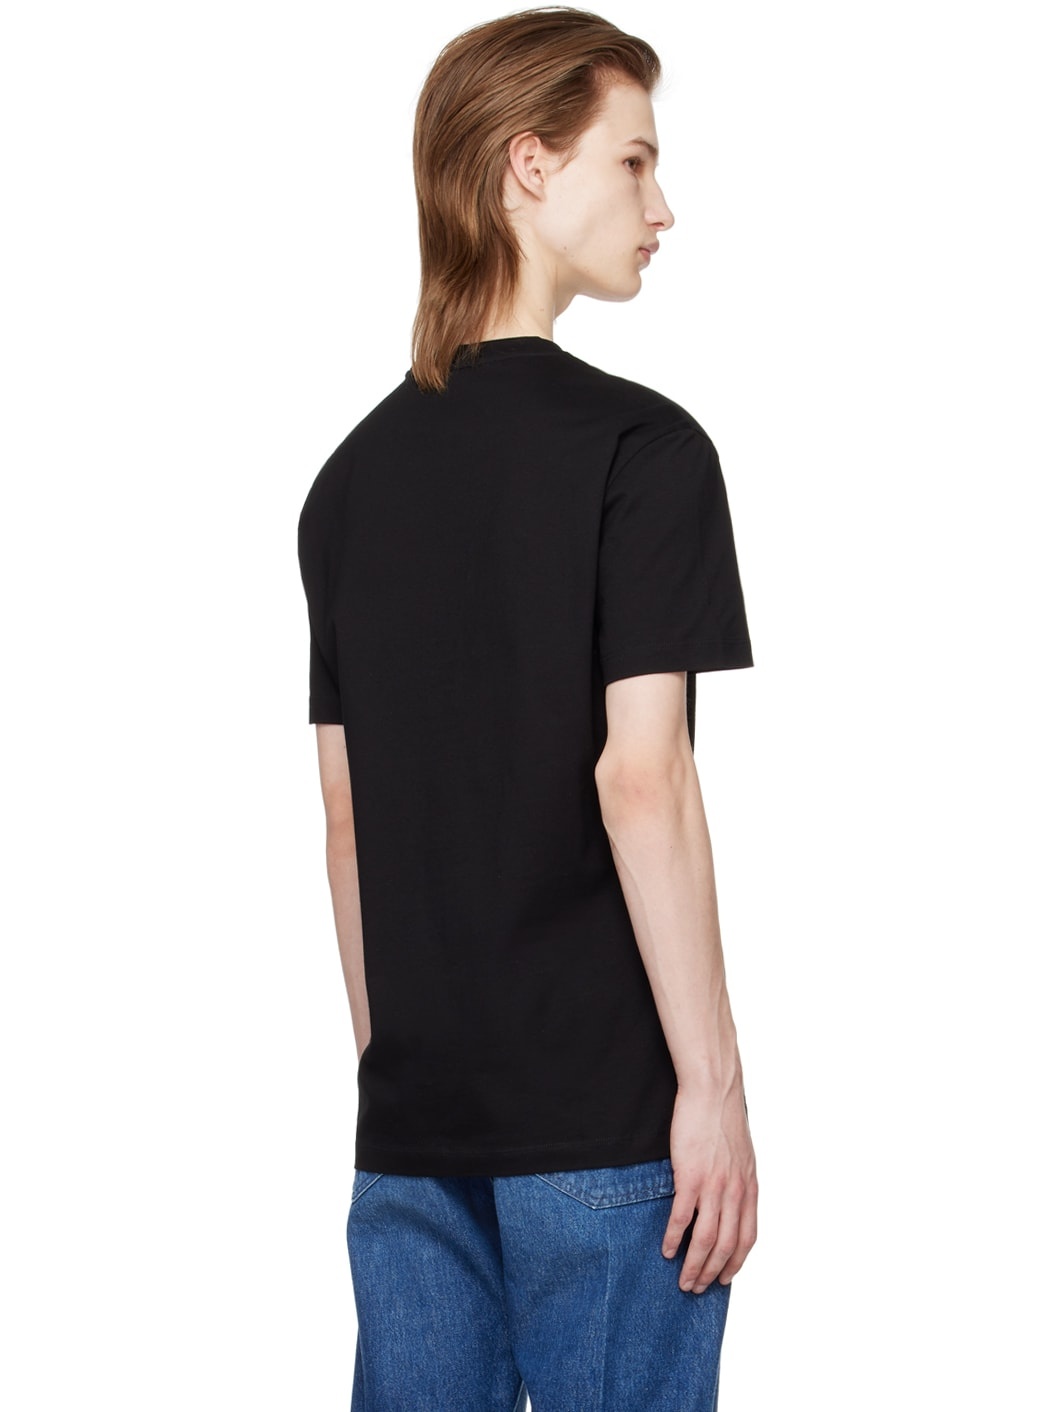 Black Embroidered T-Shirt - 3